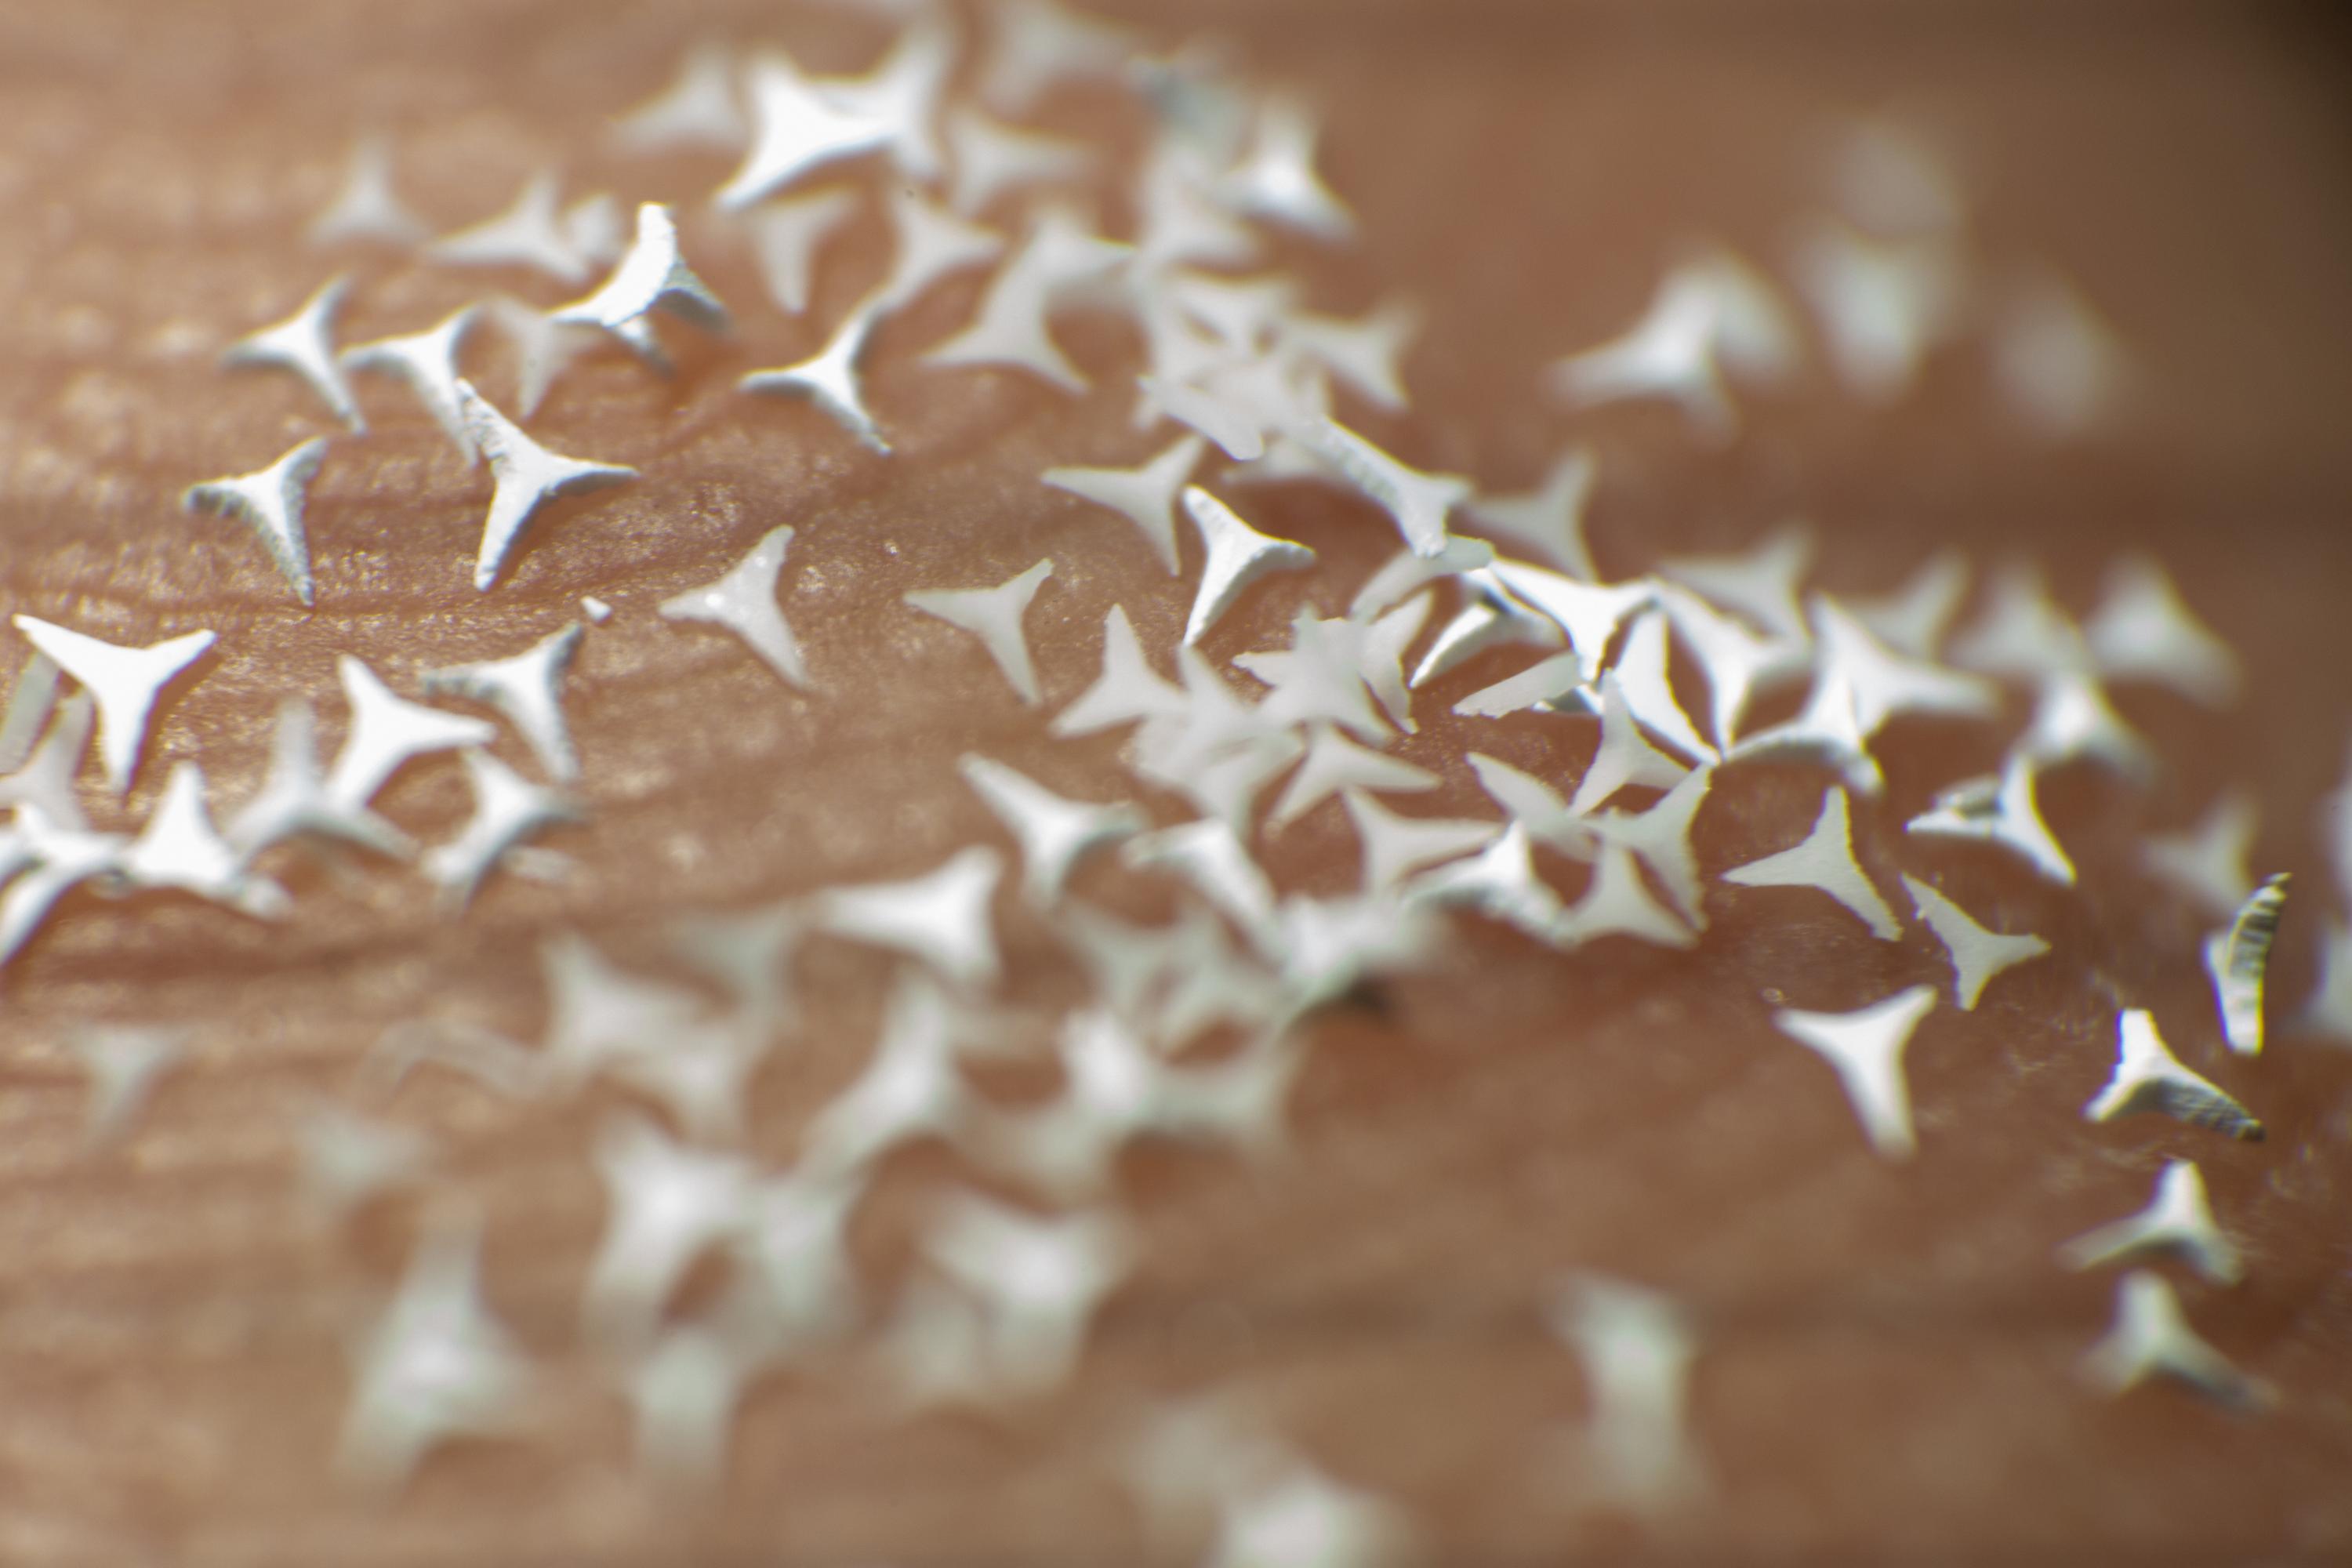 Newswise: Microscopic STAR Particles Offer New Potential Treatment for Skin Diseases